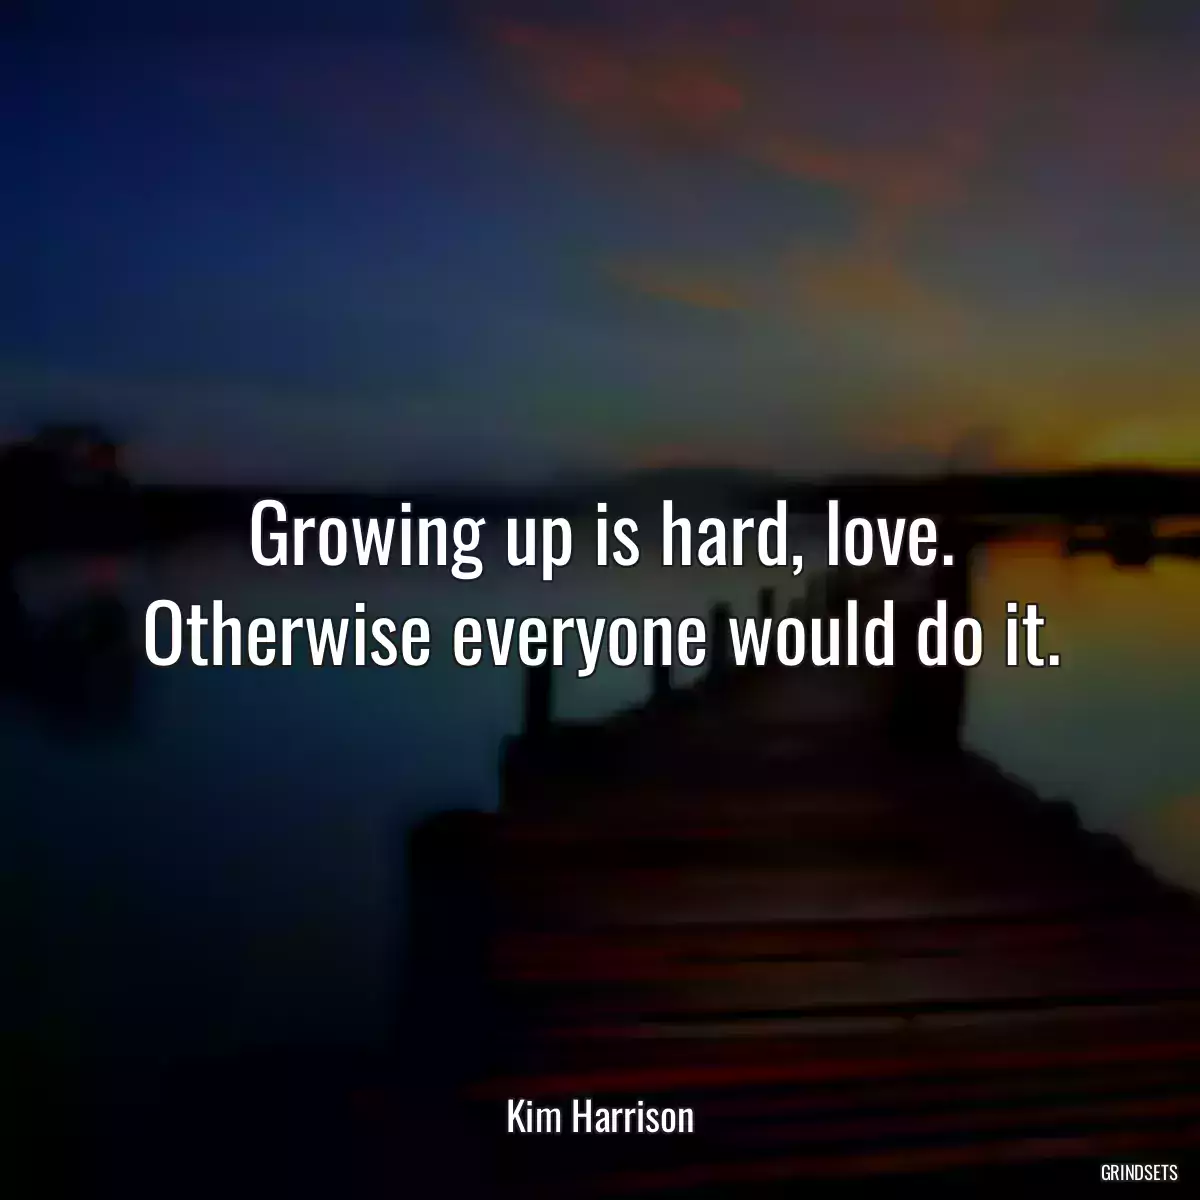 Growing up is hard, love. Otherwise everyone would do it.